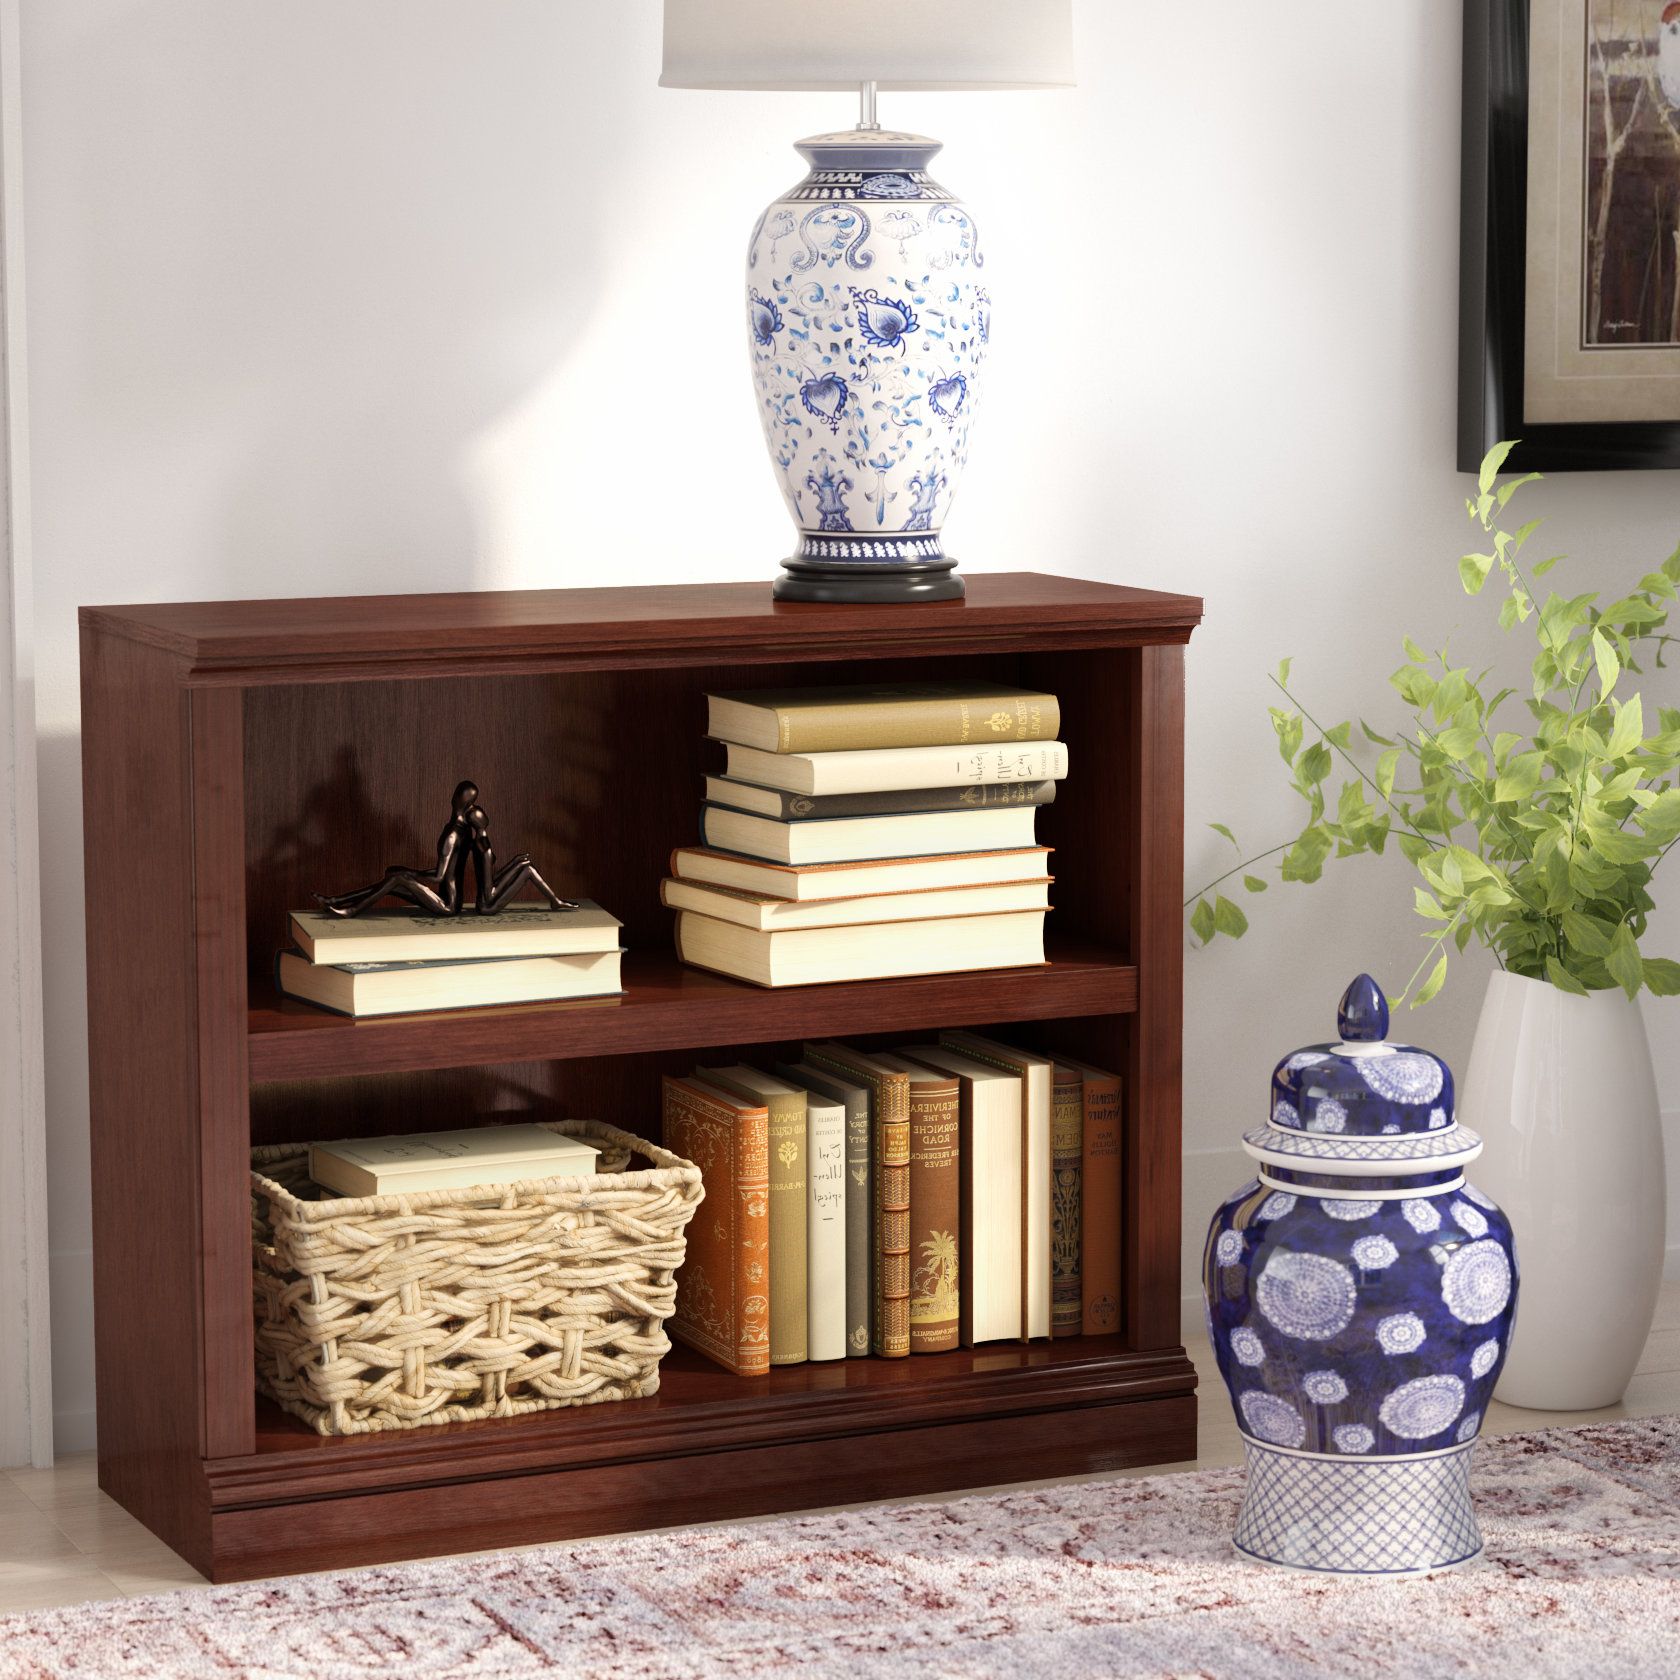 Gianni Standard Bookcase Throughout Popular Gianni Standard Bookcases (View 1 of 20)